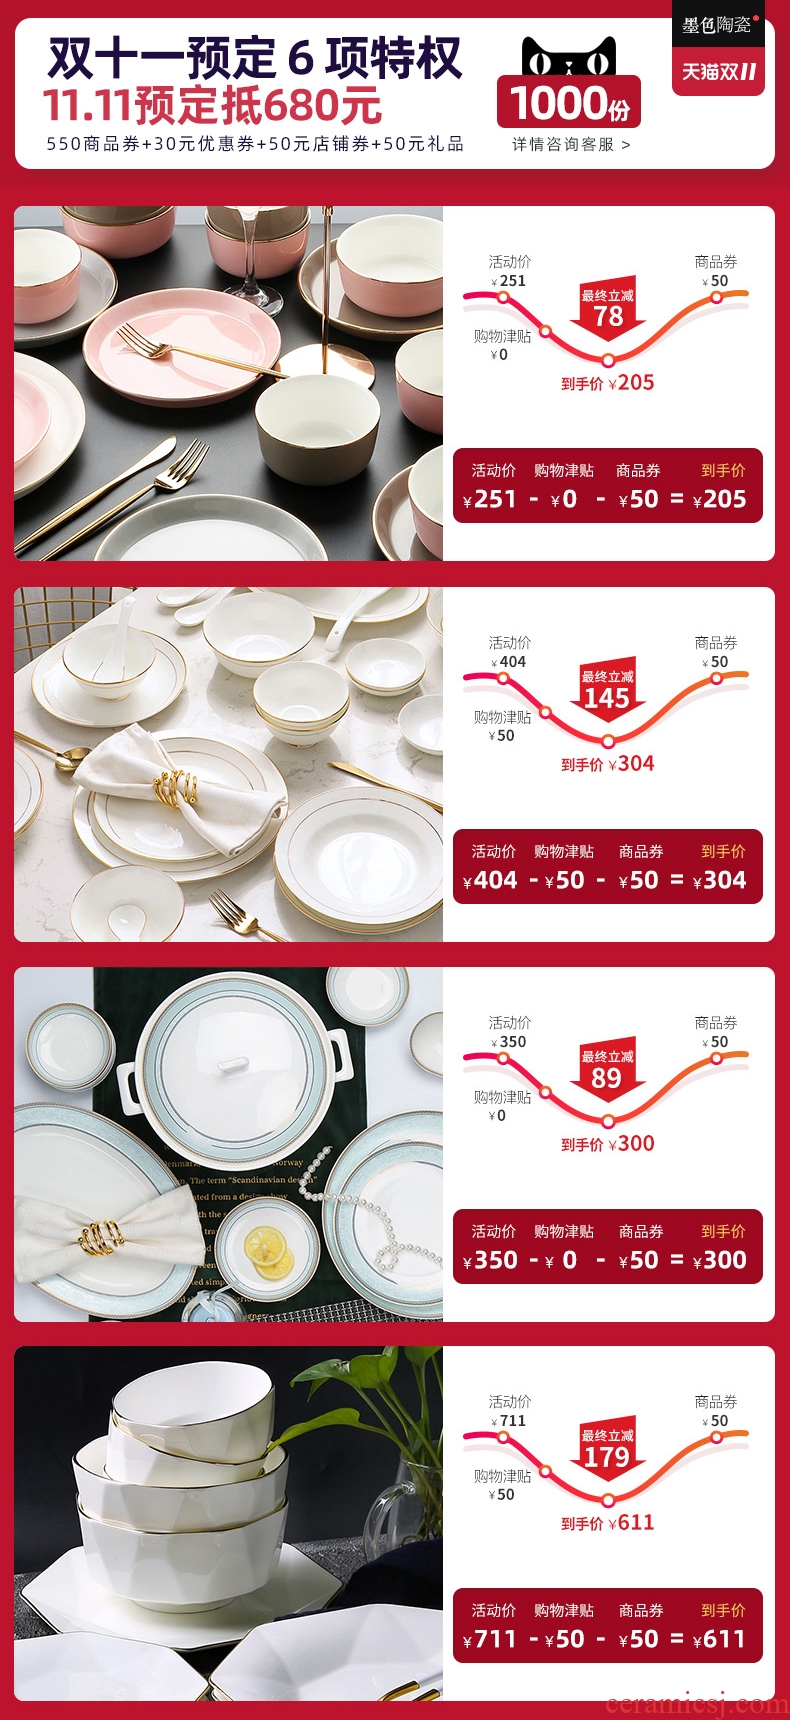 Nordic ceramic bowl individual creative contracted wind move web celebrity home tableware breakfast is bread and butter rice bowls small bowl